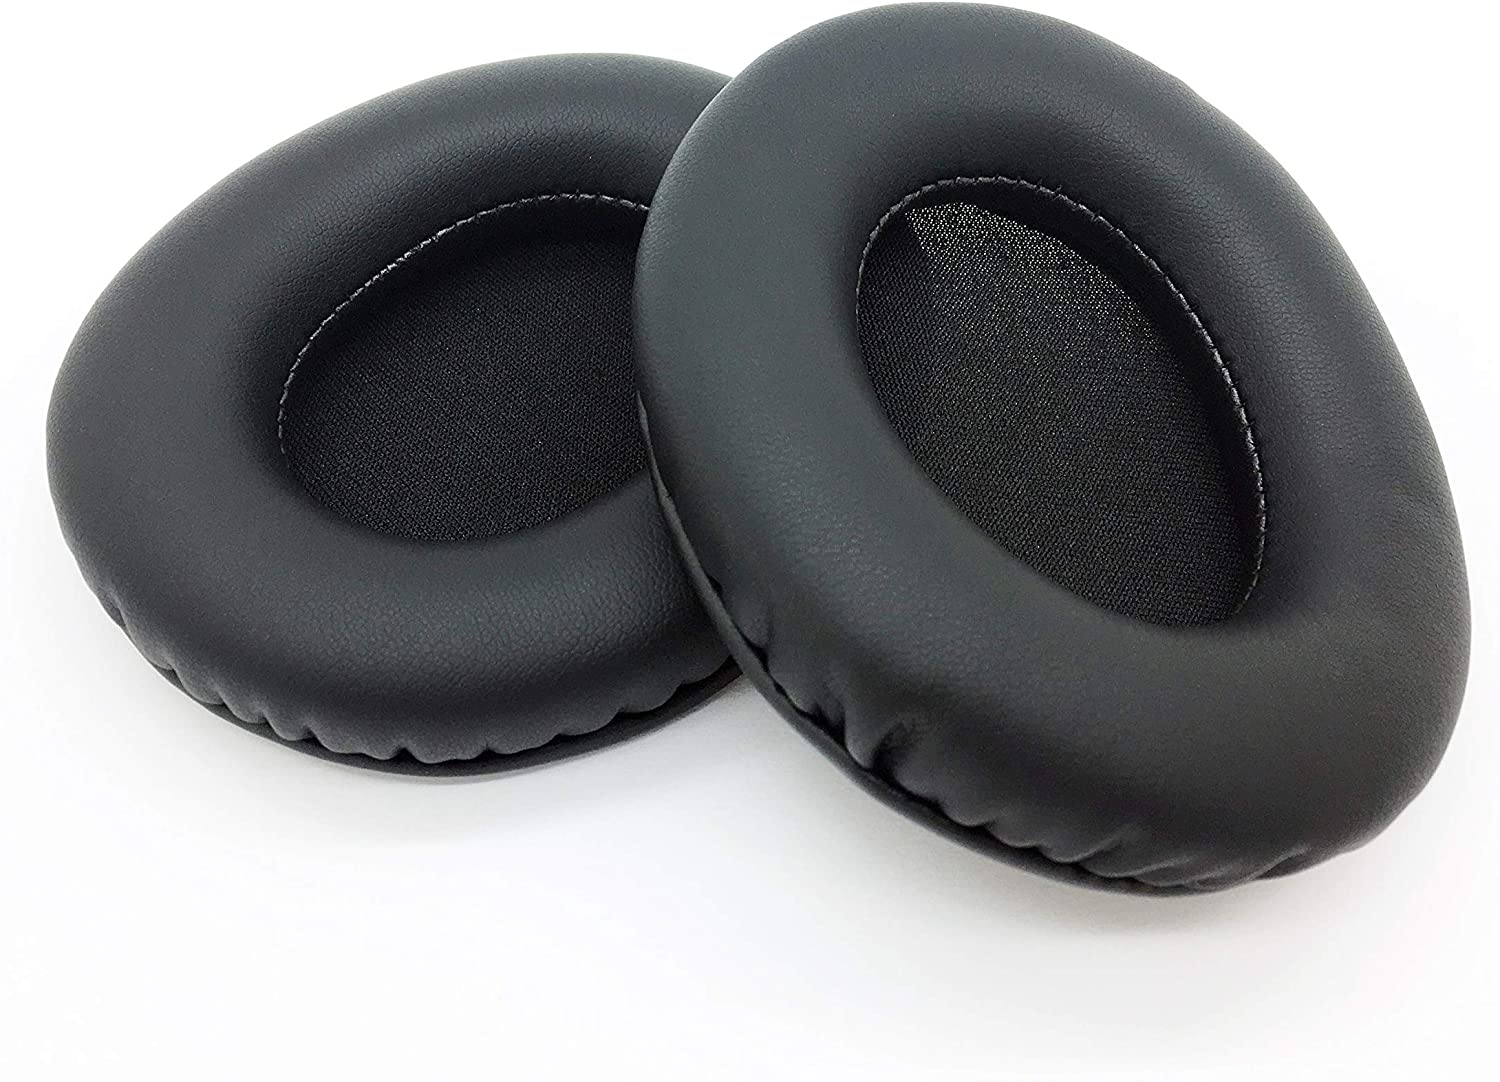 AvimaBasics COWIN E8 Replacement Earpads - Black